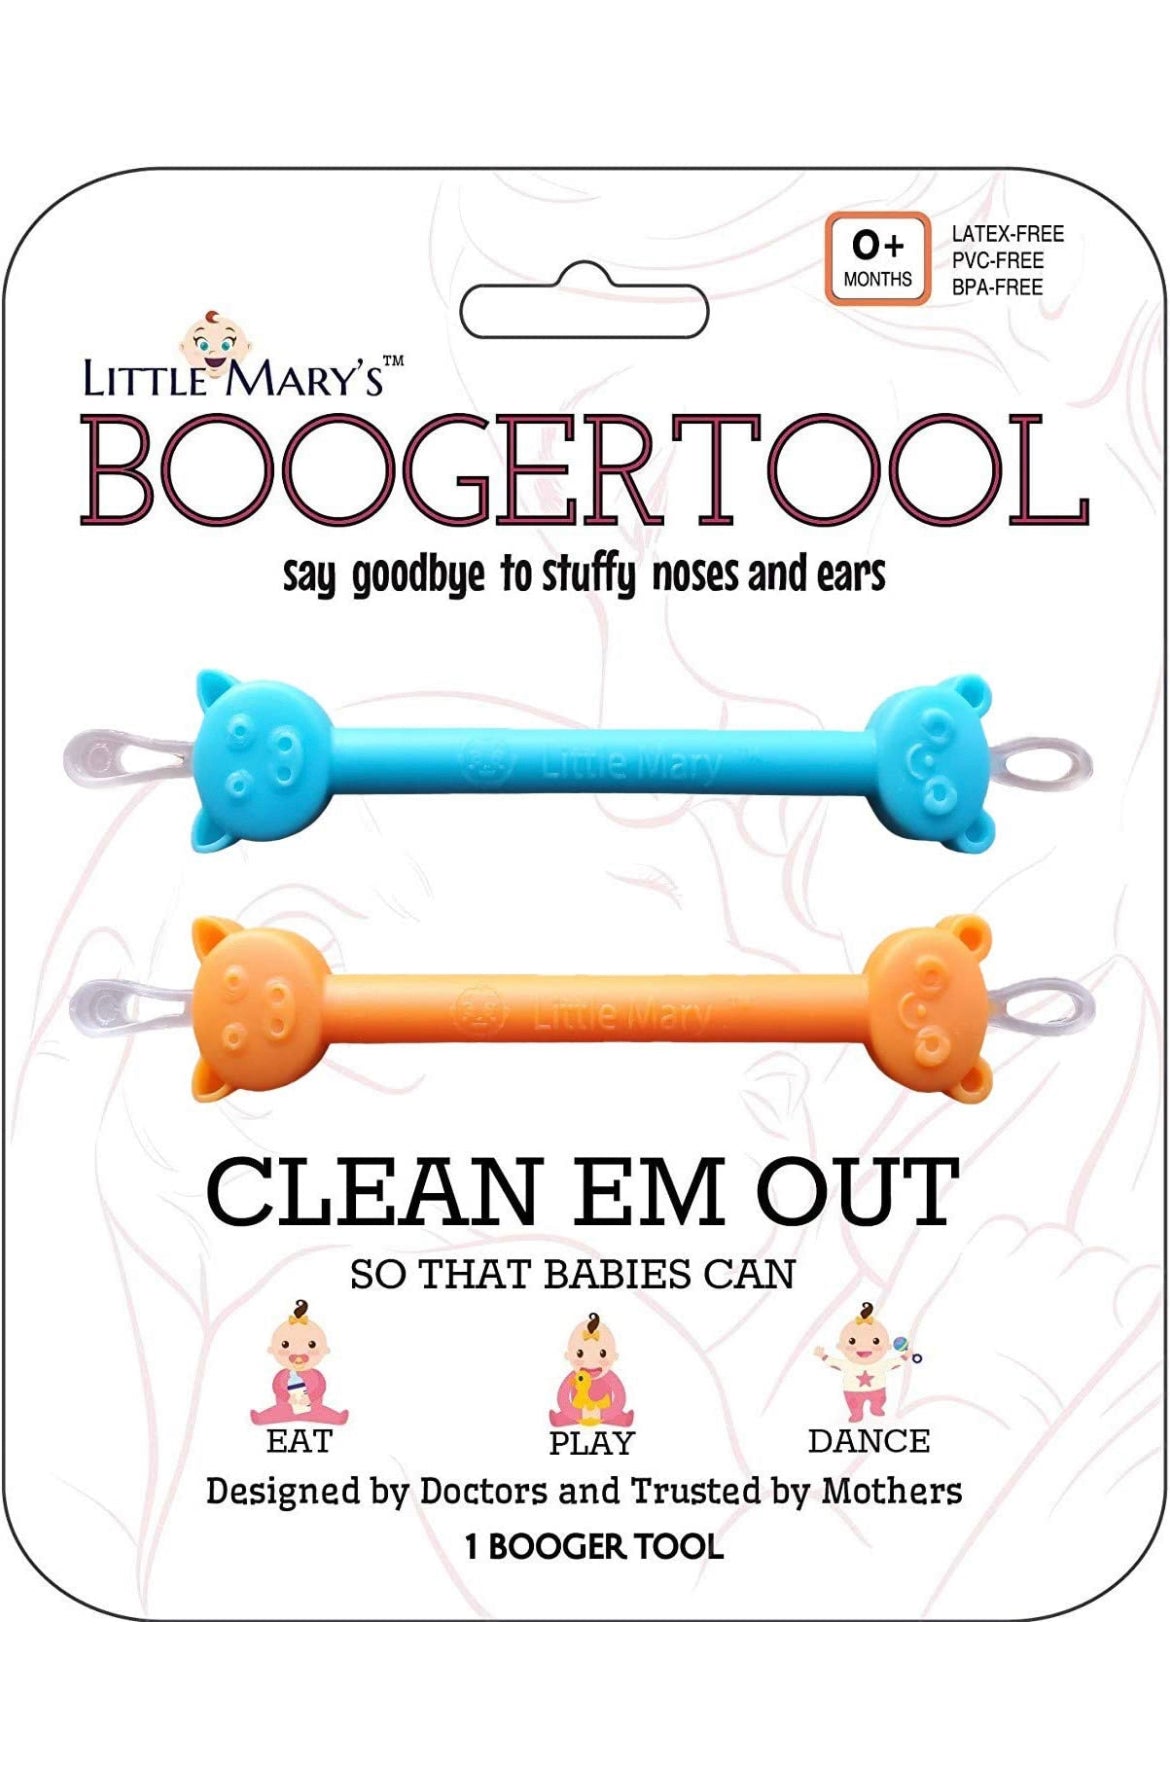 Baby Nasal Booger Tool by Little Marry.